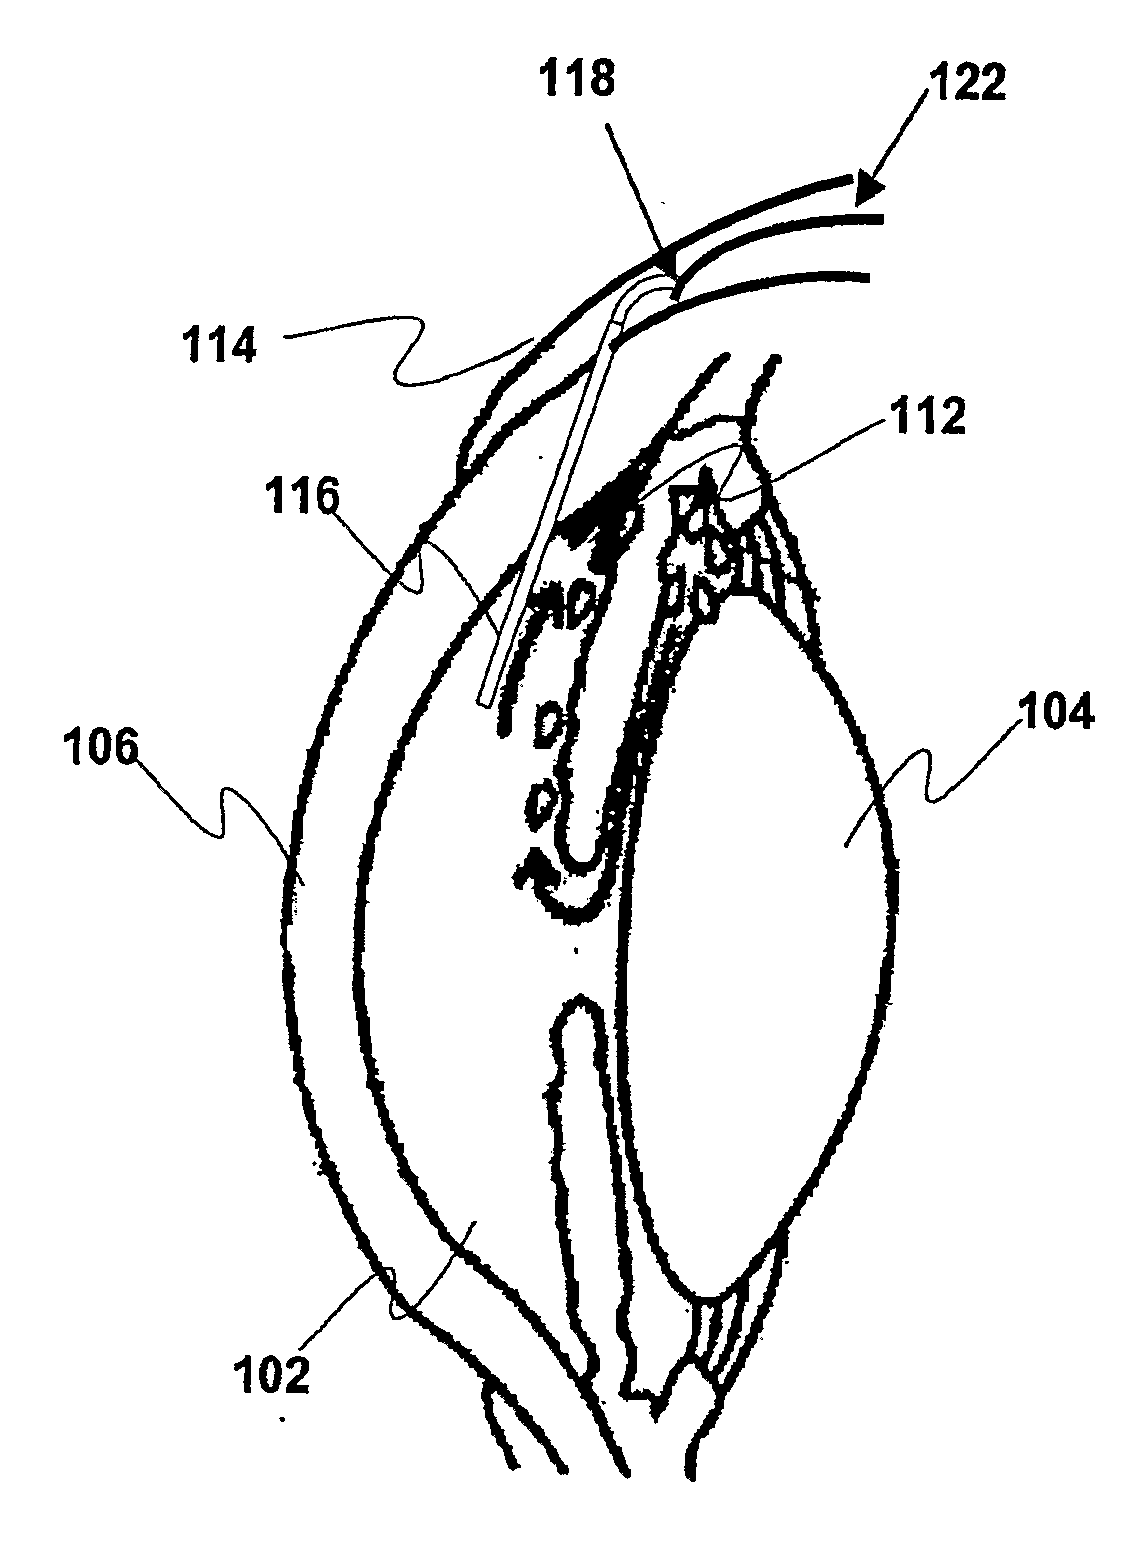 Systems and Methods for Monitoring and Controlling Internal Pressure of an Eye or Body Part